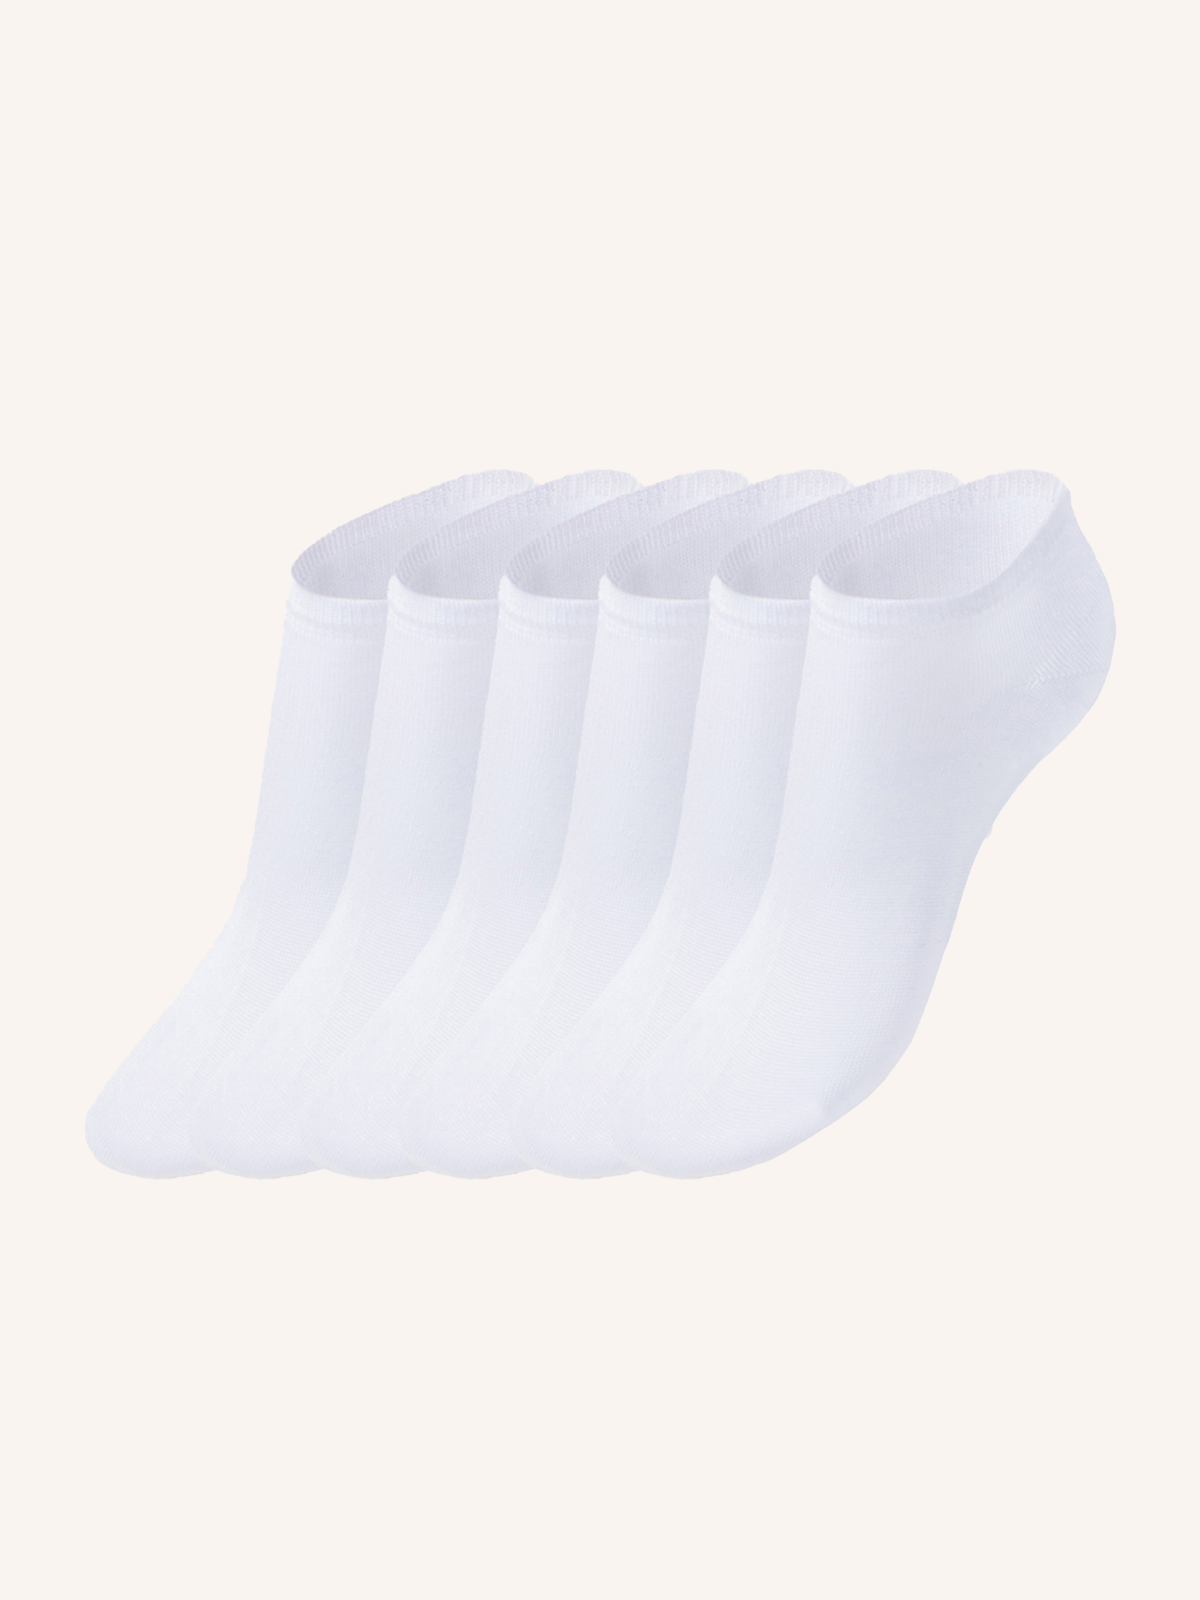 Cotton Sock for Women | Plain Color | Pack of 6 Pairs | Pedulino D